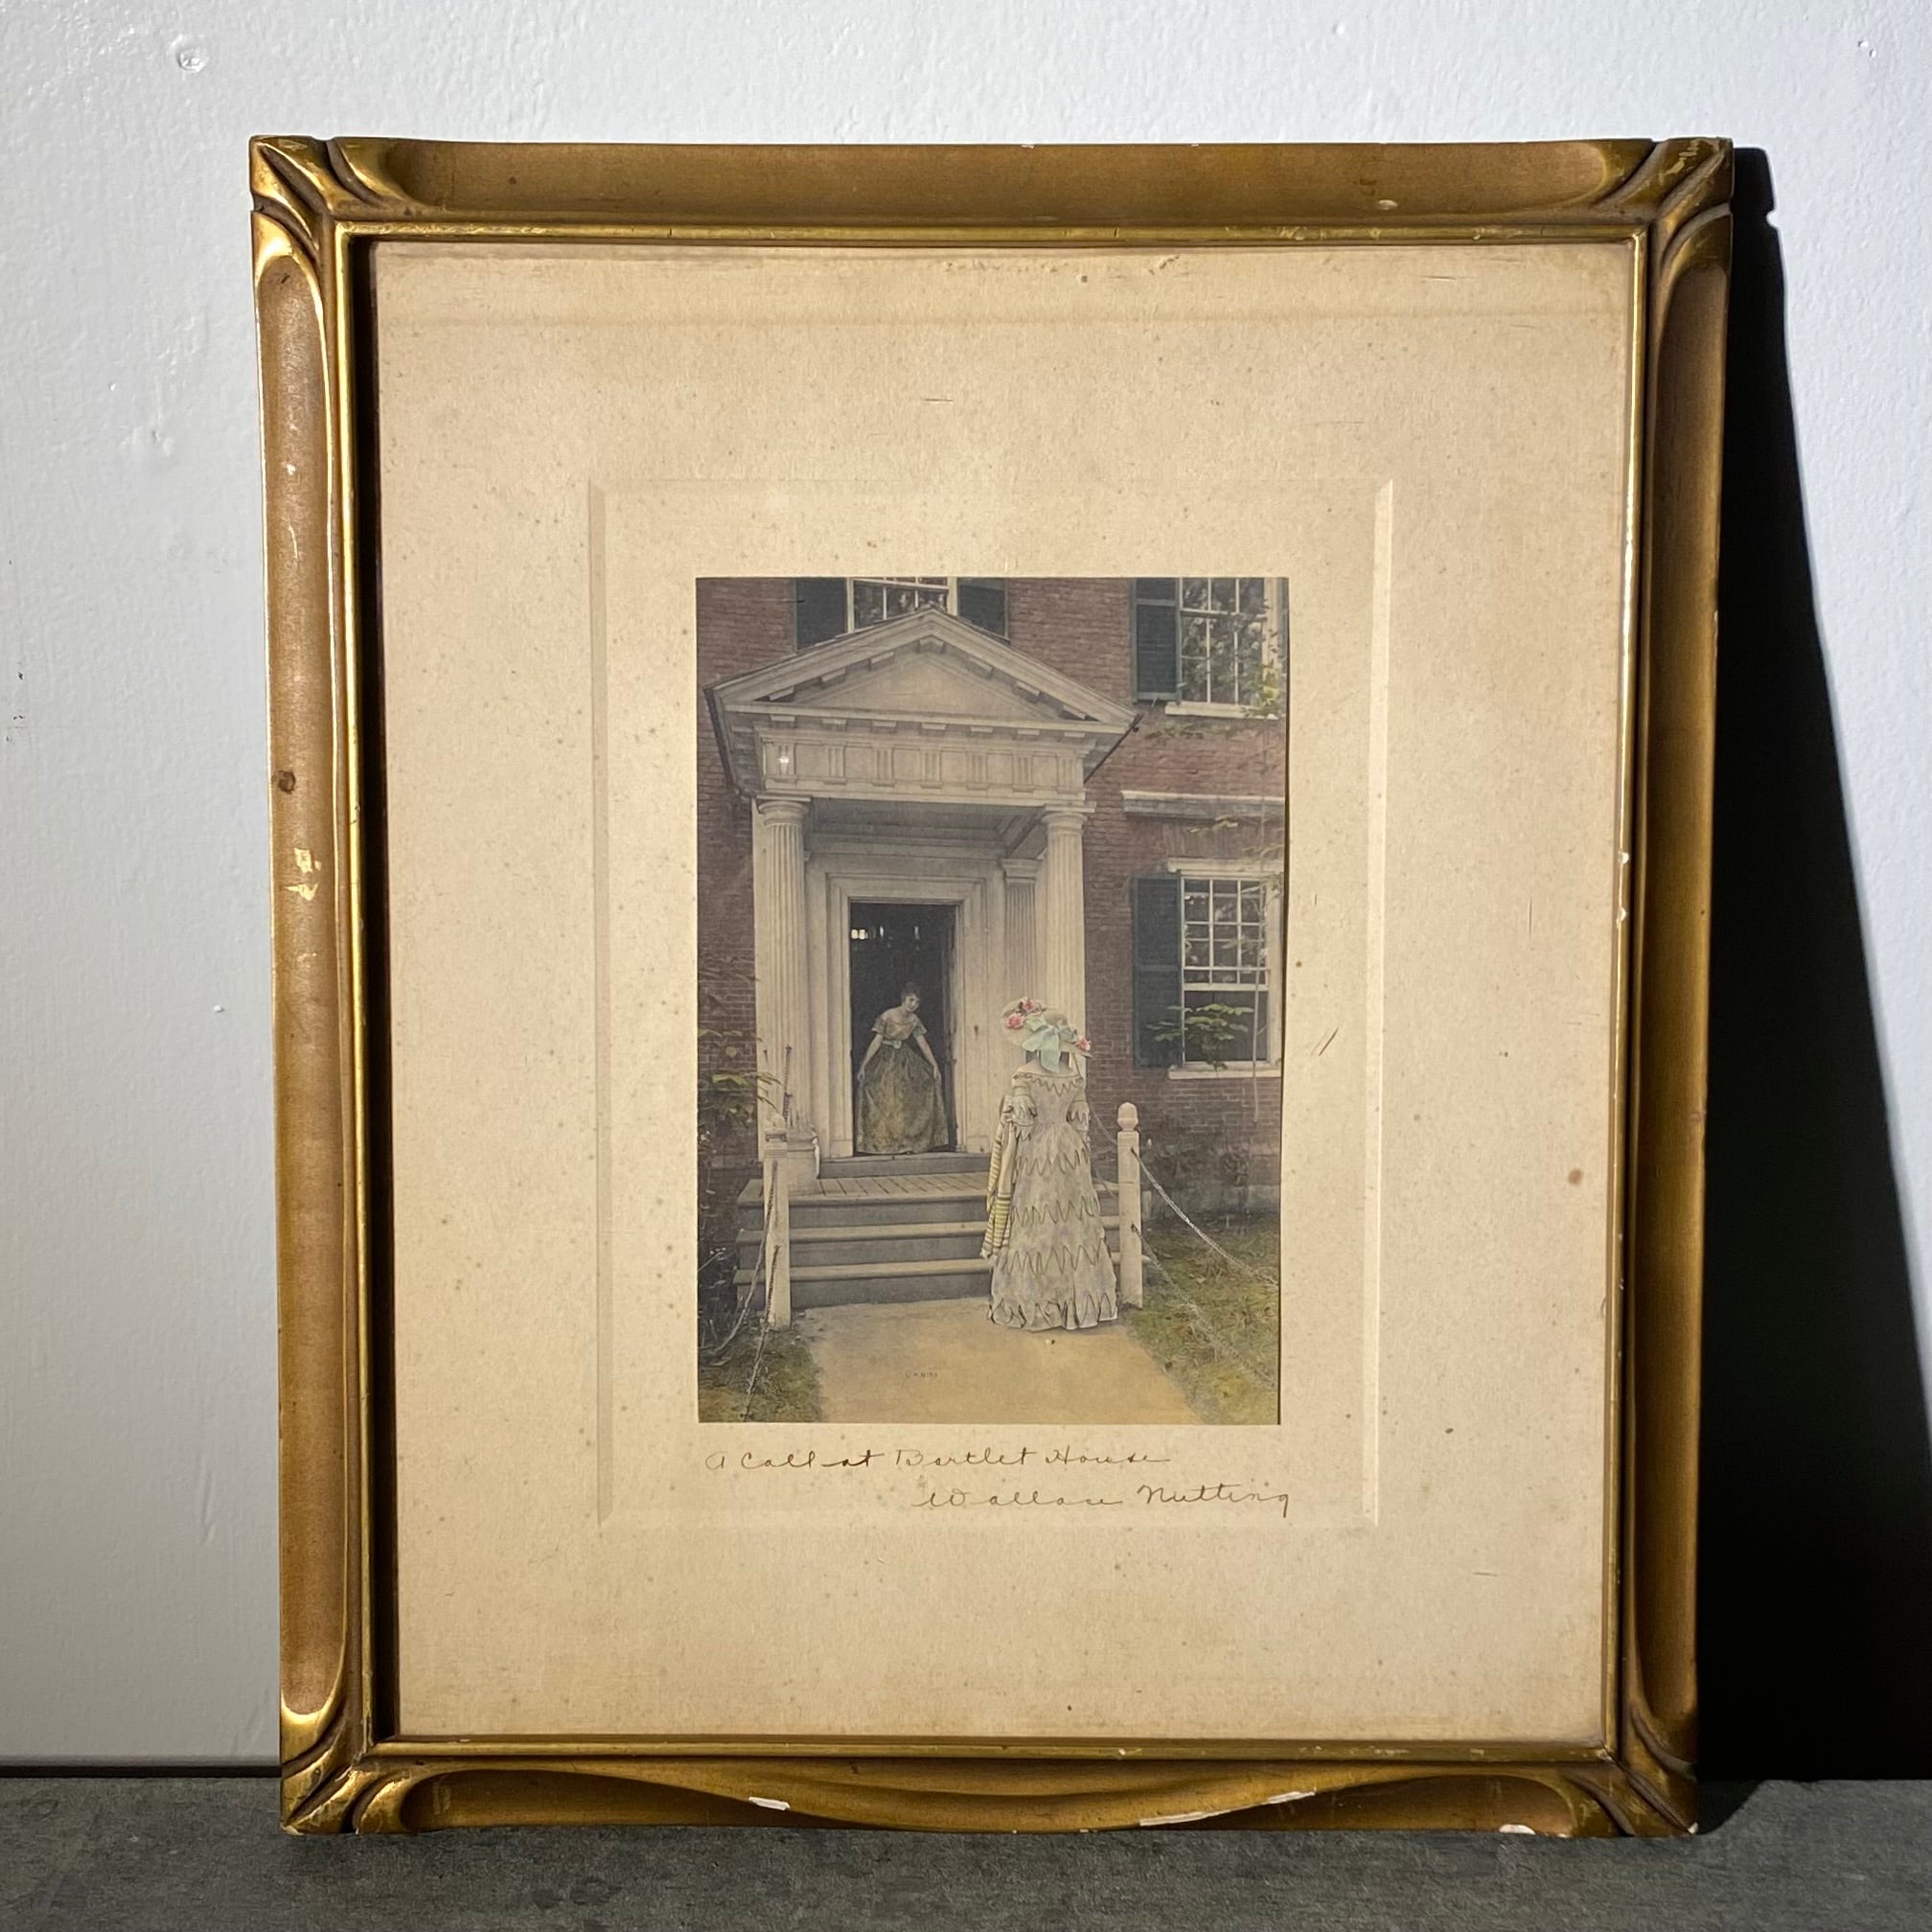 "A Call at Bartlet House" By Wallace Nutting Framed Litho